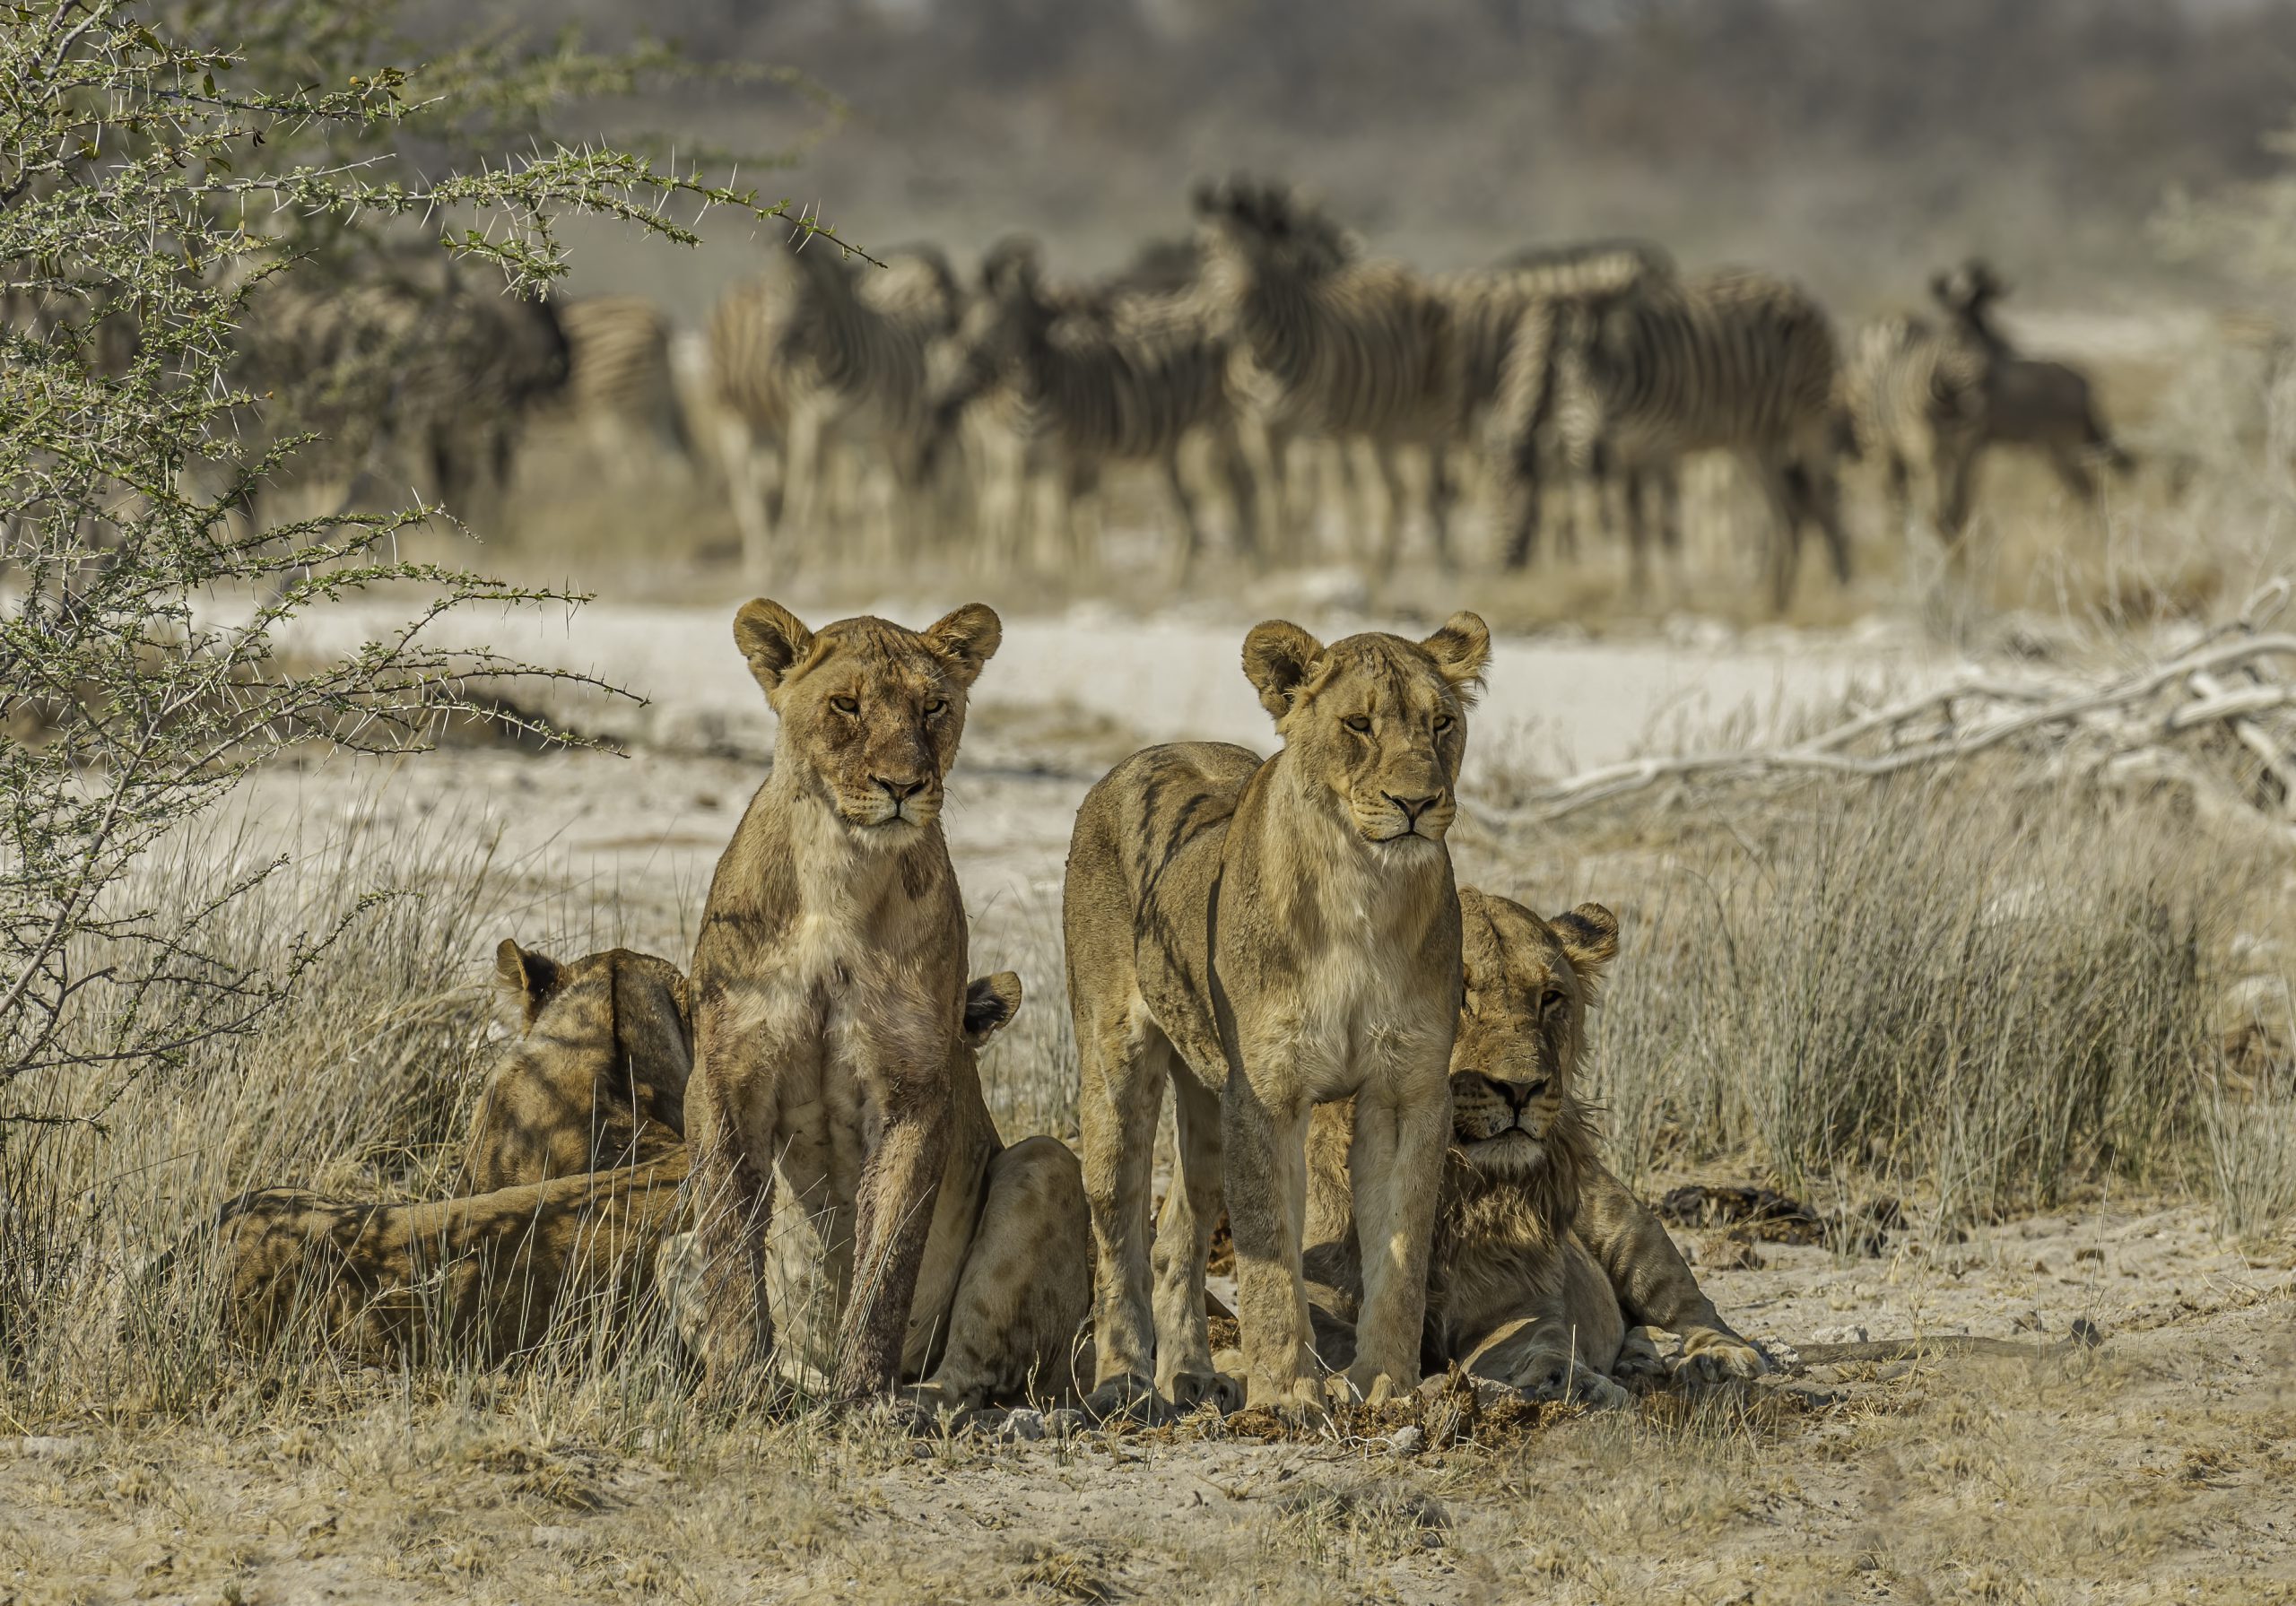 African Lions ready for a hunt, Panthera leo, Etosha Pan National Park, Namibia, Carnivora, Felidae. Zebras in the backround but not what they are interested.